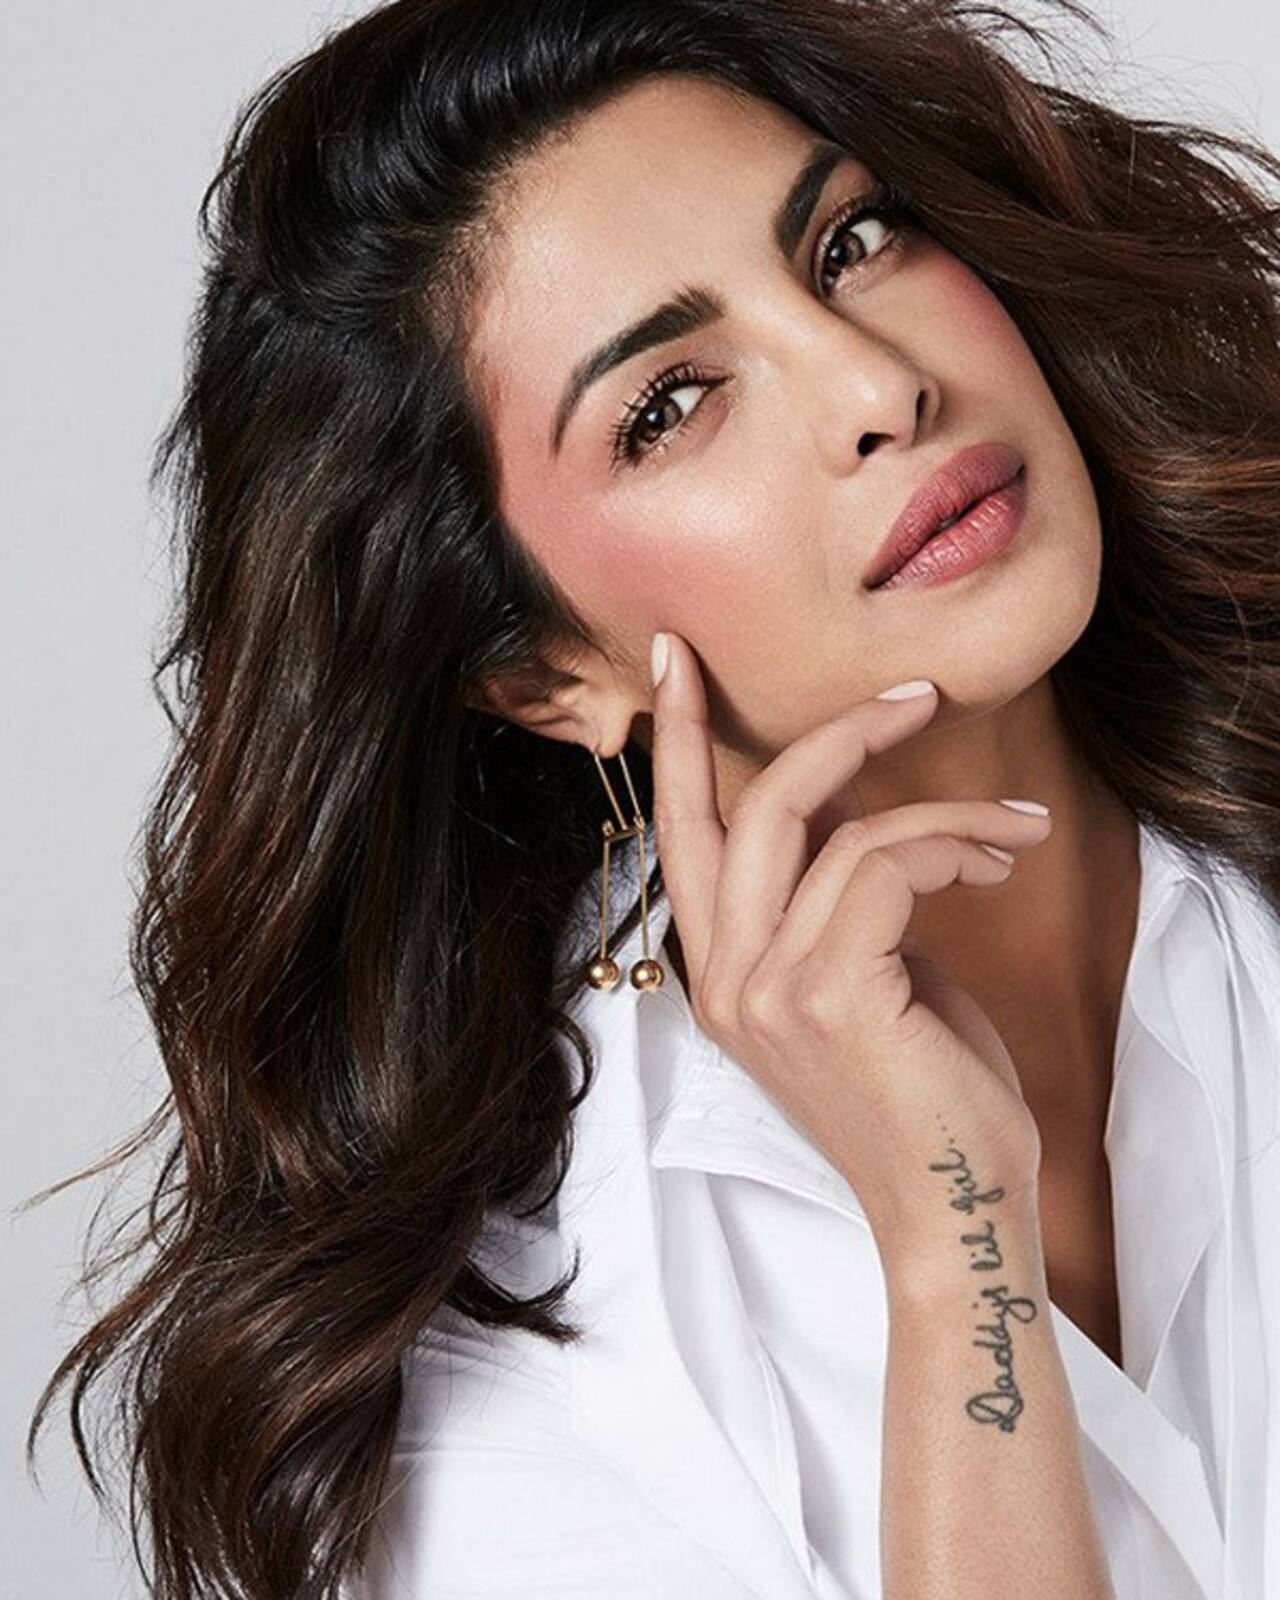 Priyanka Chopra Takes Up The Issue Of Gender Inequality And Inspires Girls To Break Stereotypes 